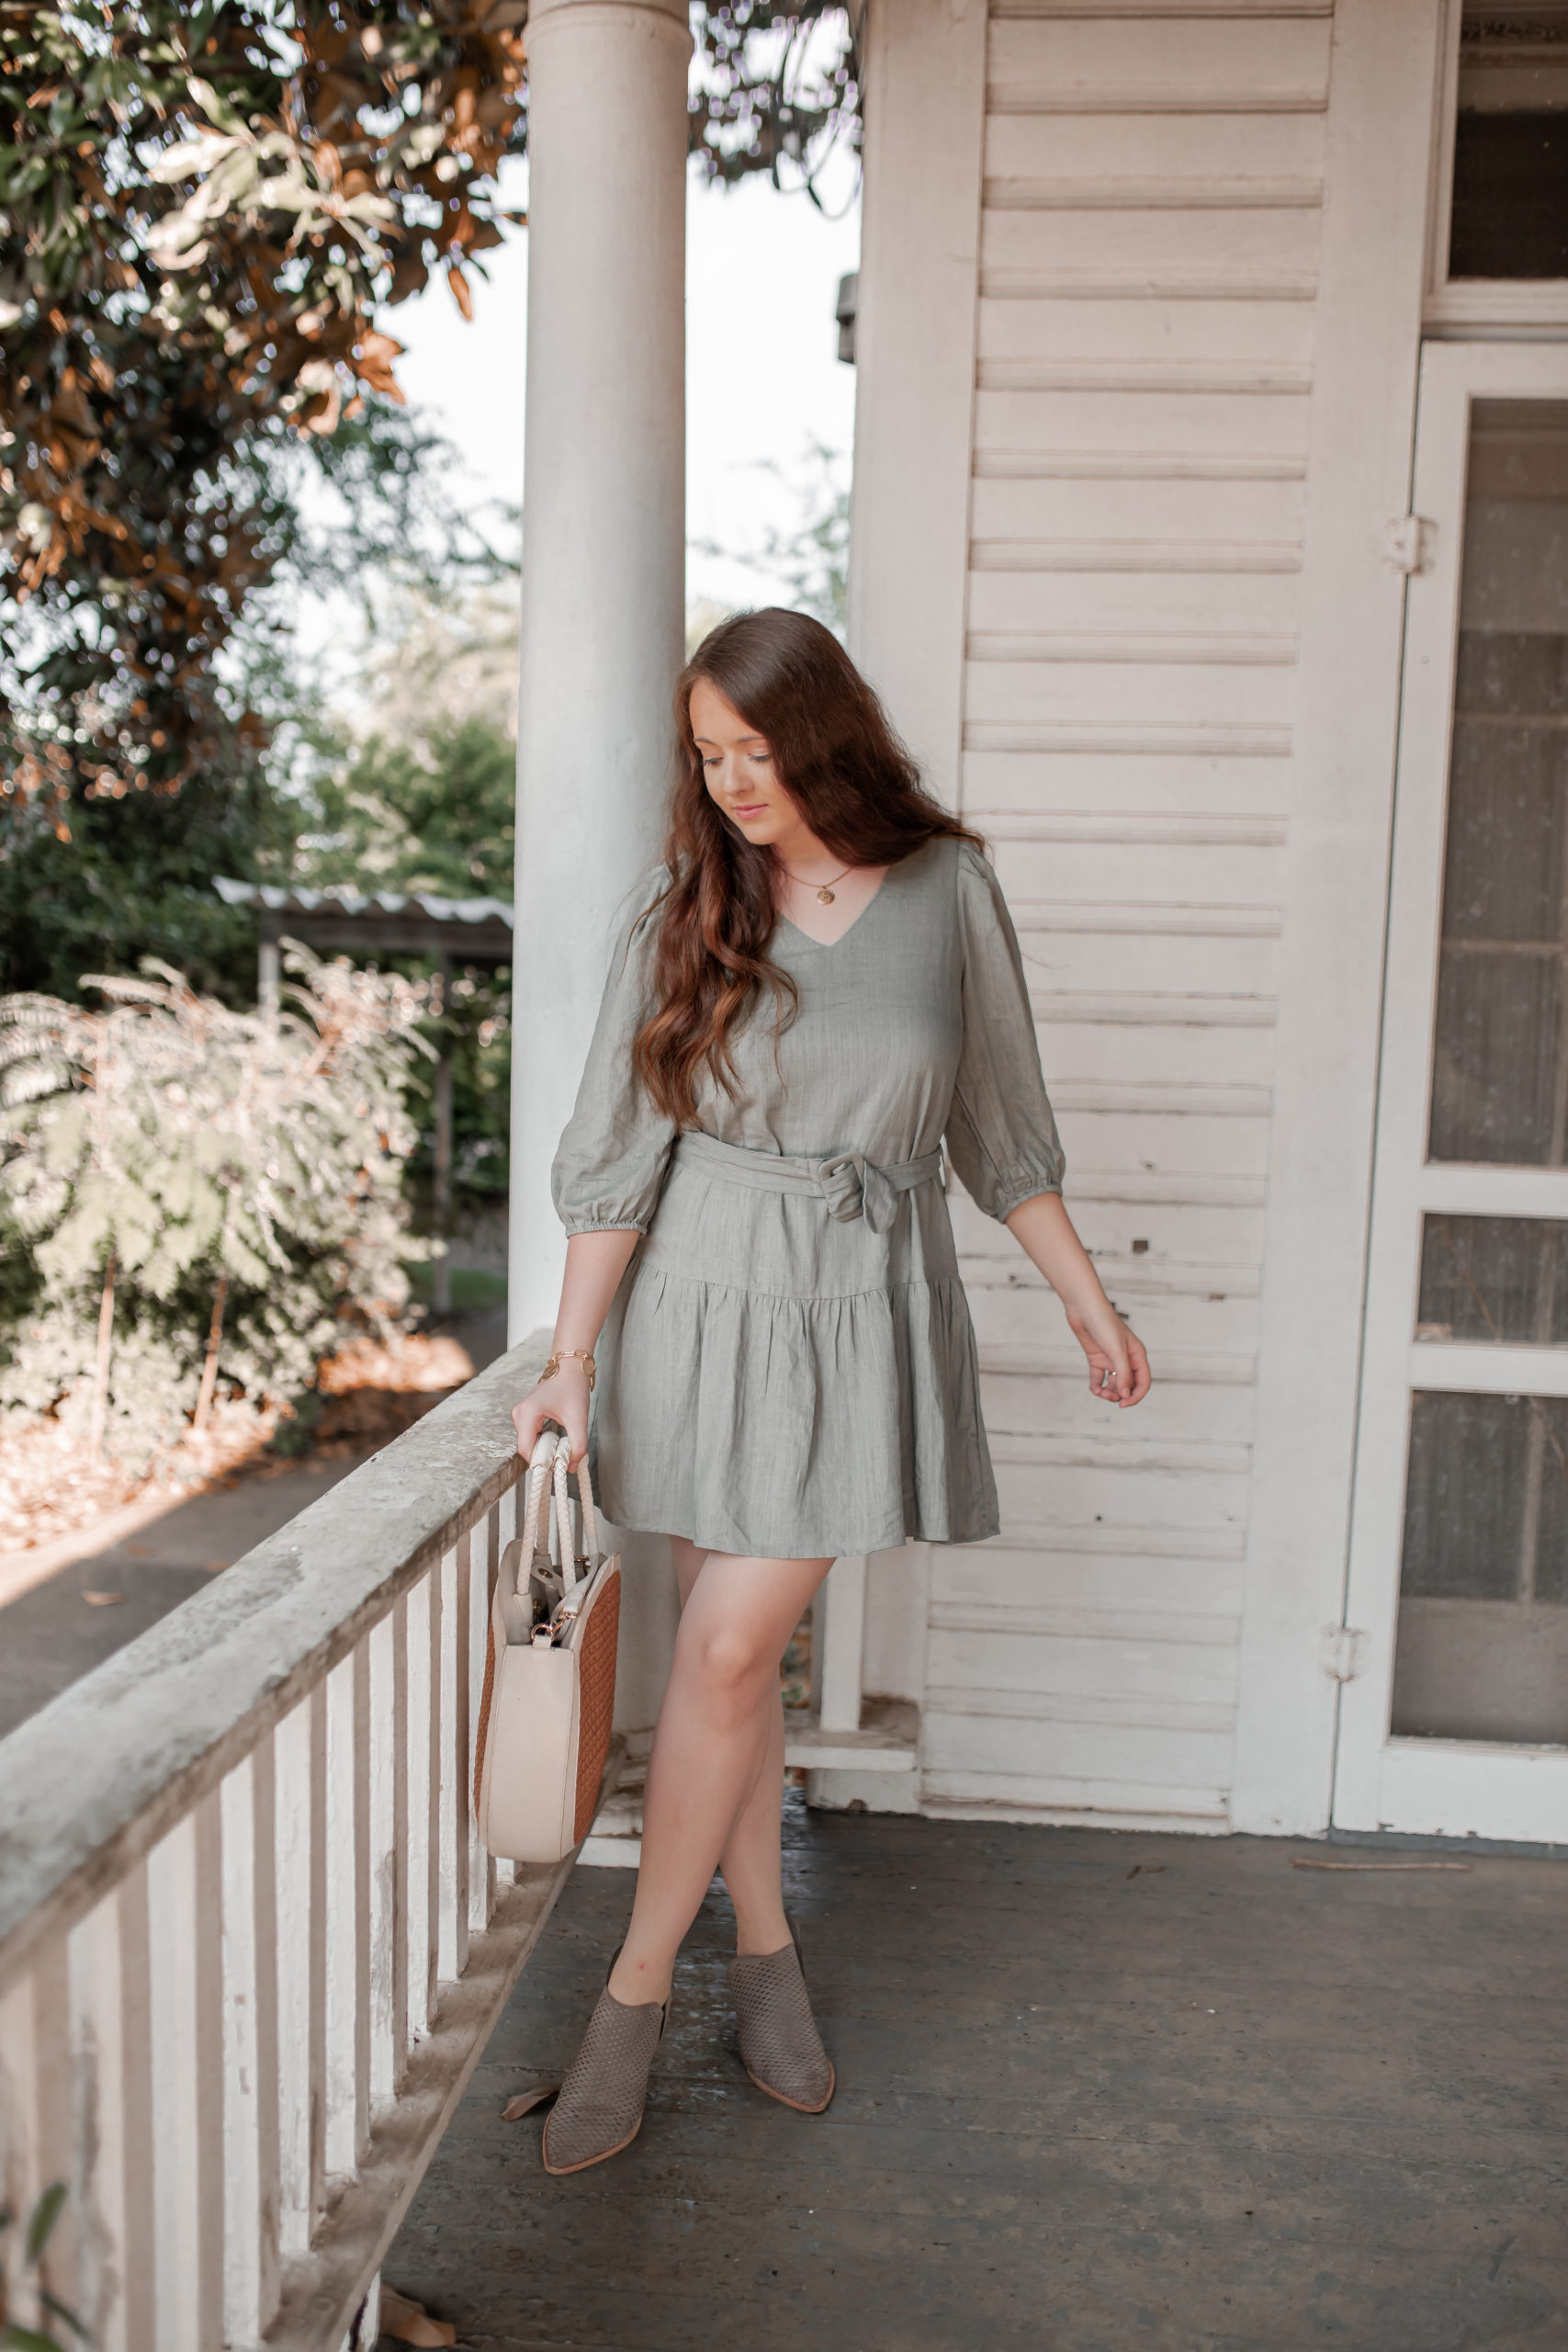 A Mossy Green Dress To Wear Now Into Fall!